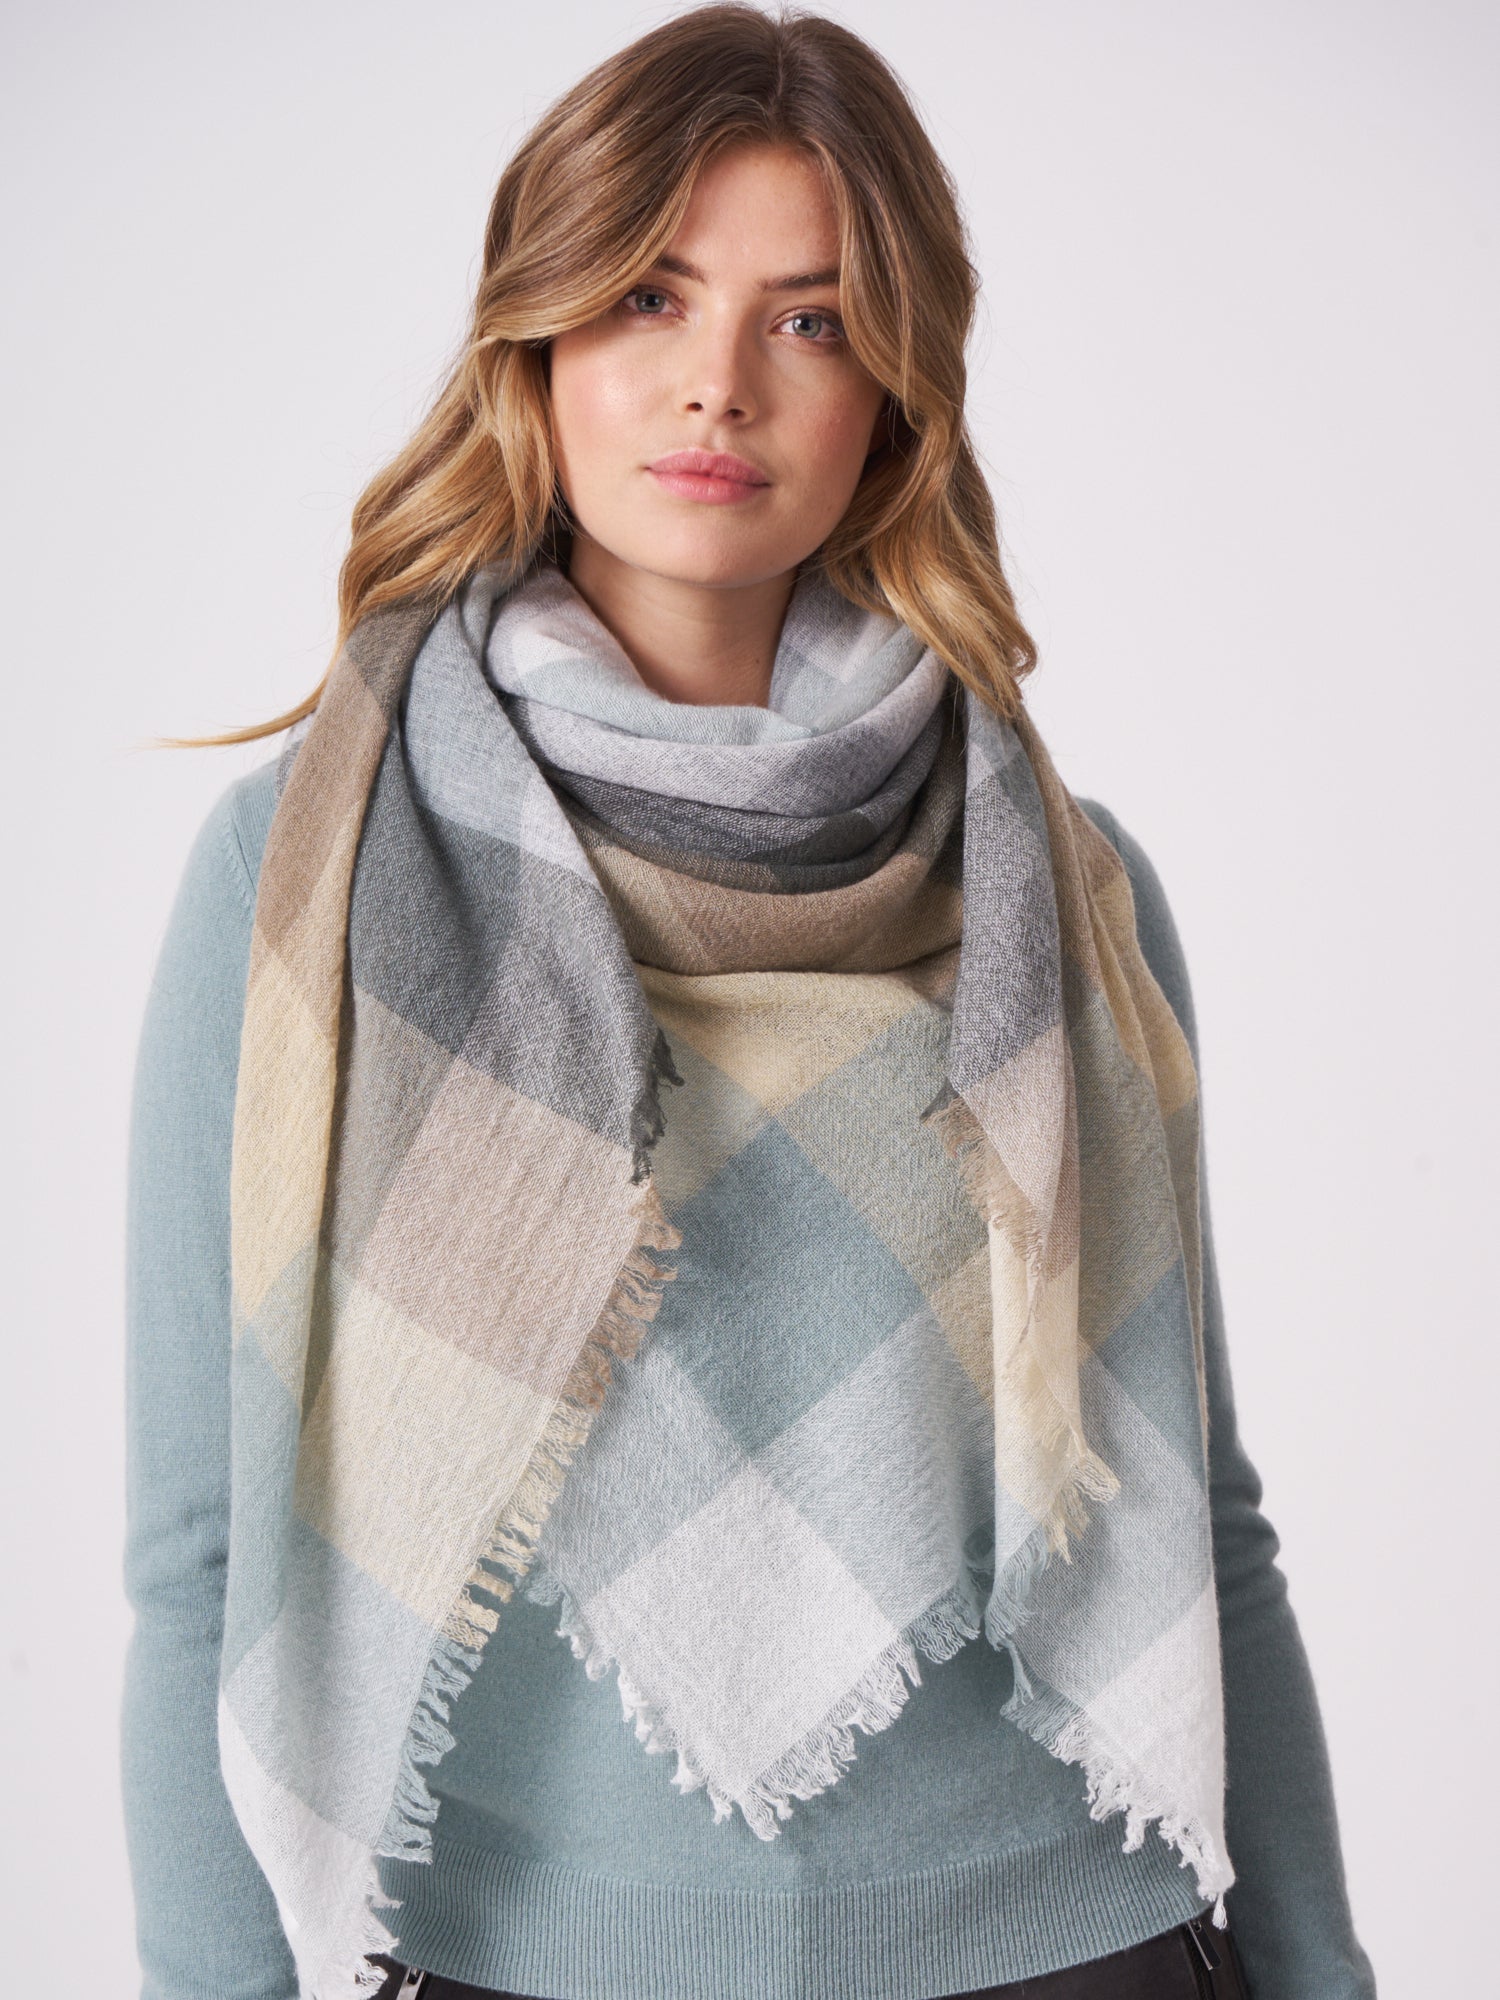 Plaid Scarf by Repeat